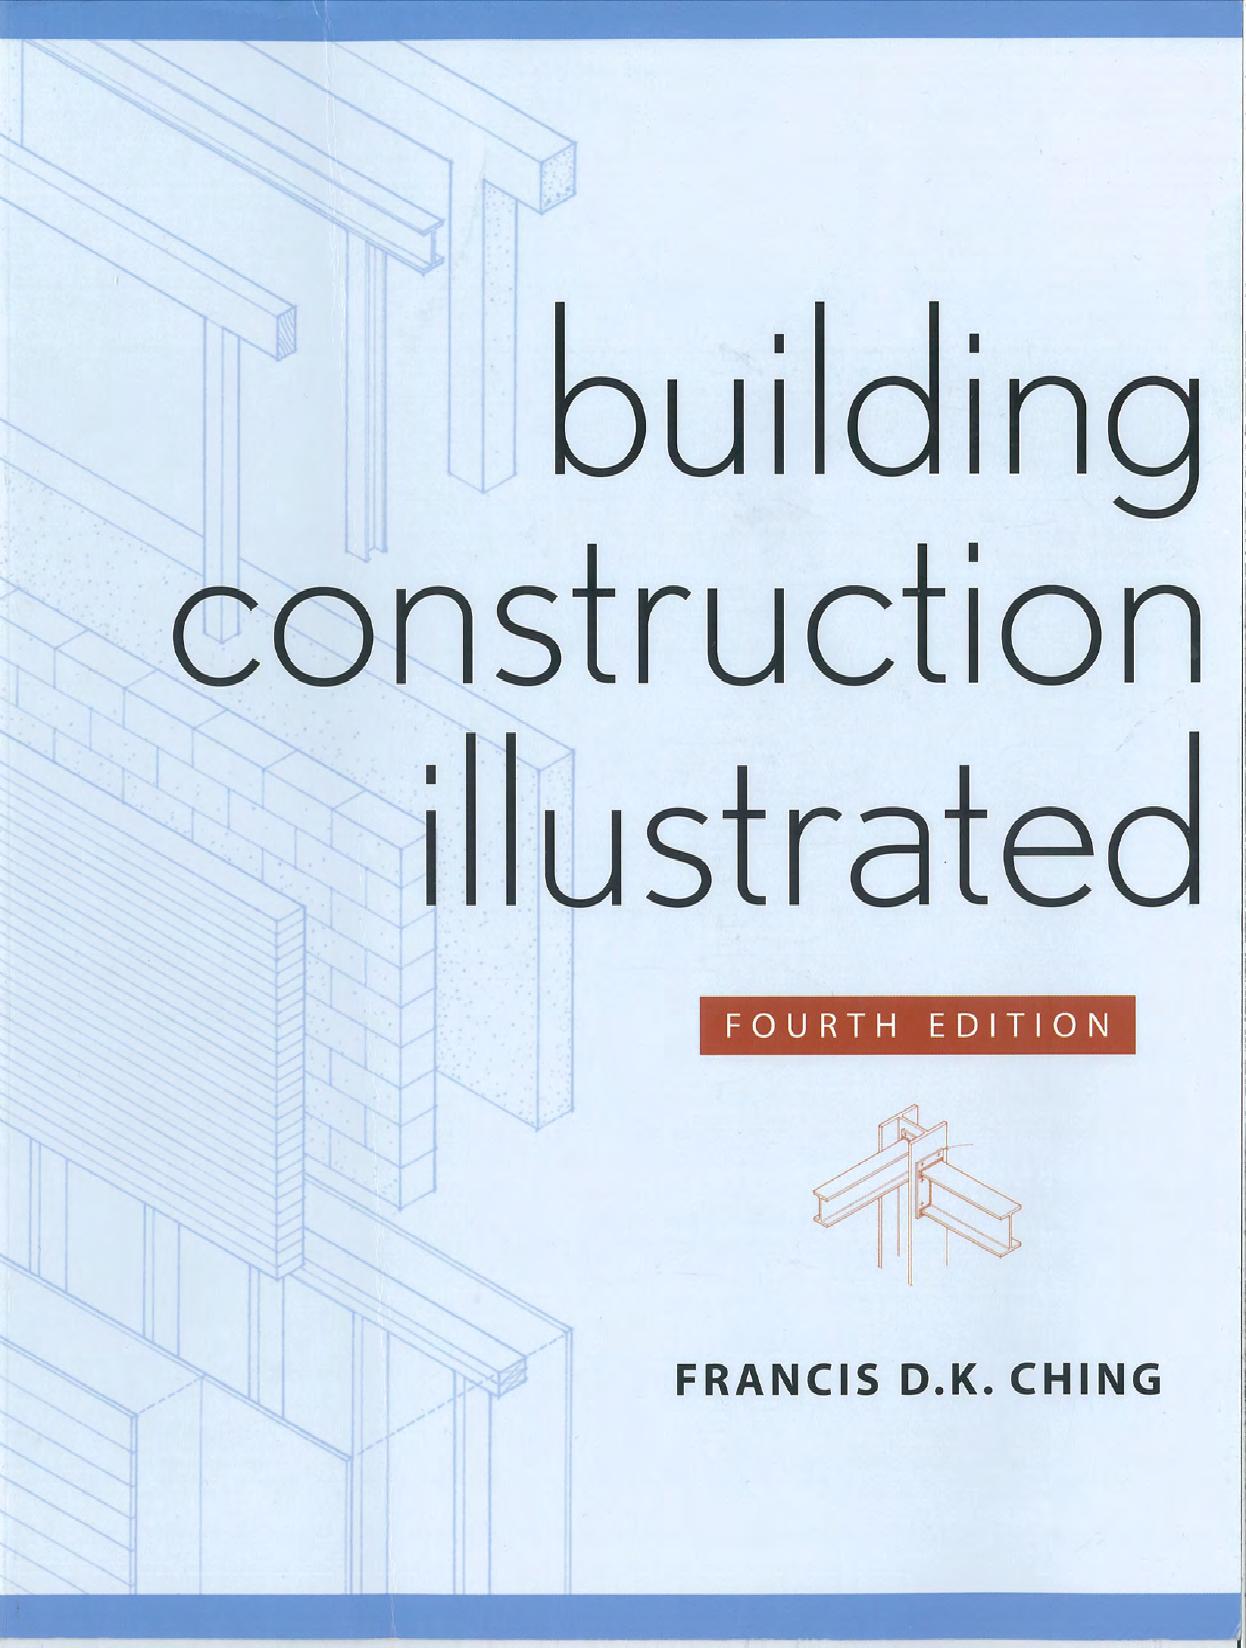 Building Construction Illustrated 4th ed